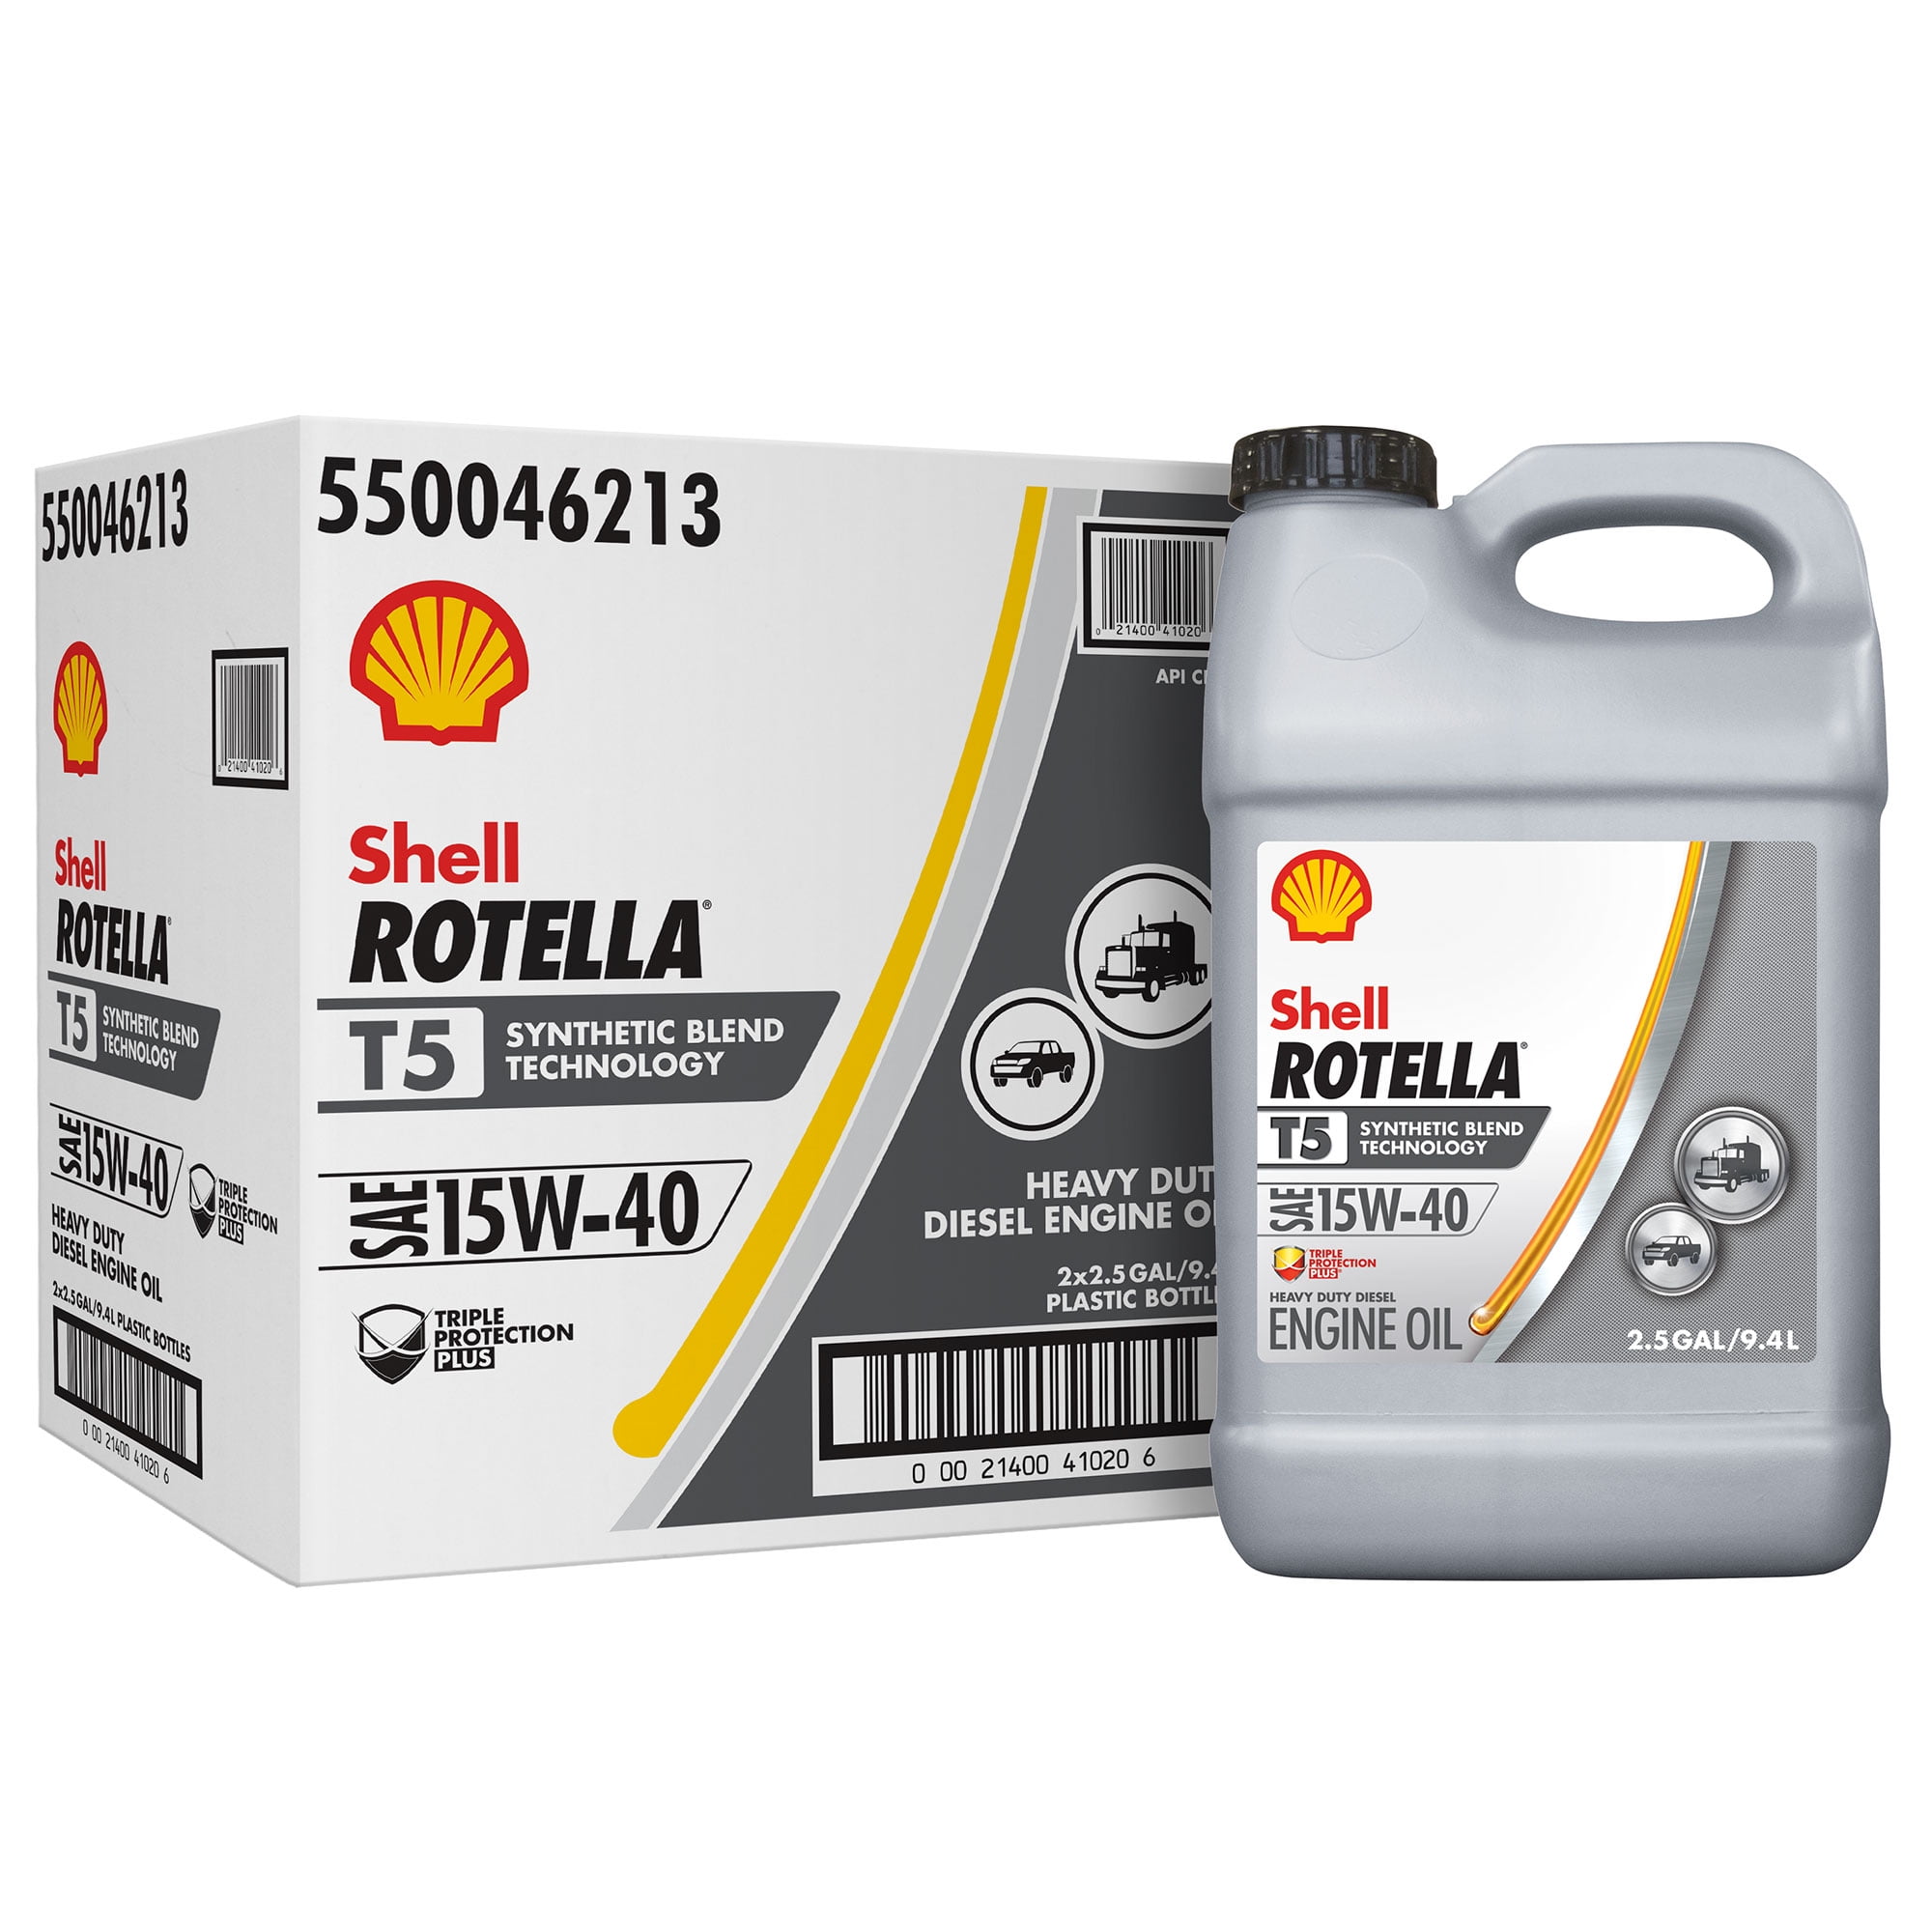 Shell ROTELLA T5 15W-40 Synthetic Blend Engine Oil 55 Gallon Drum